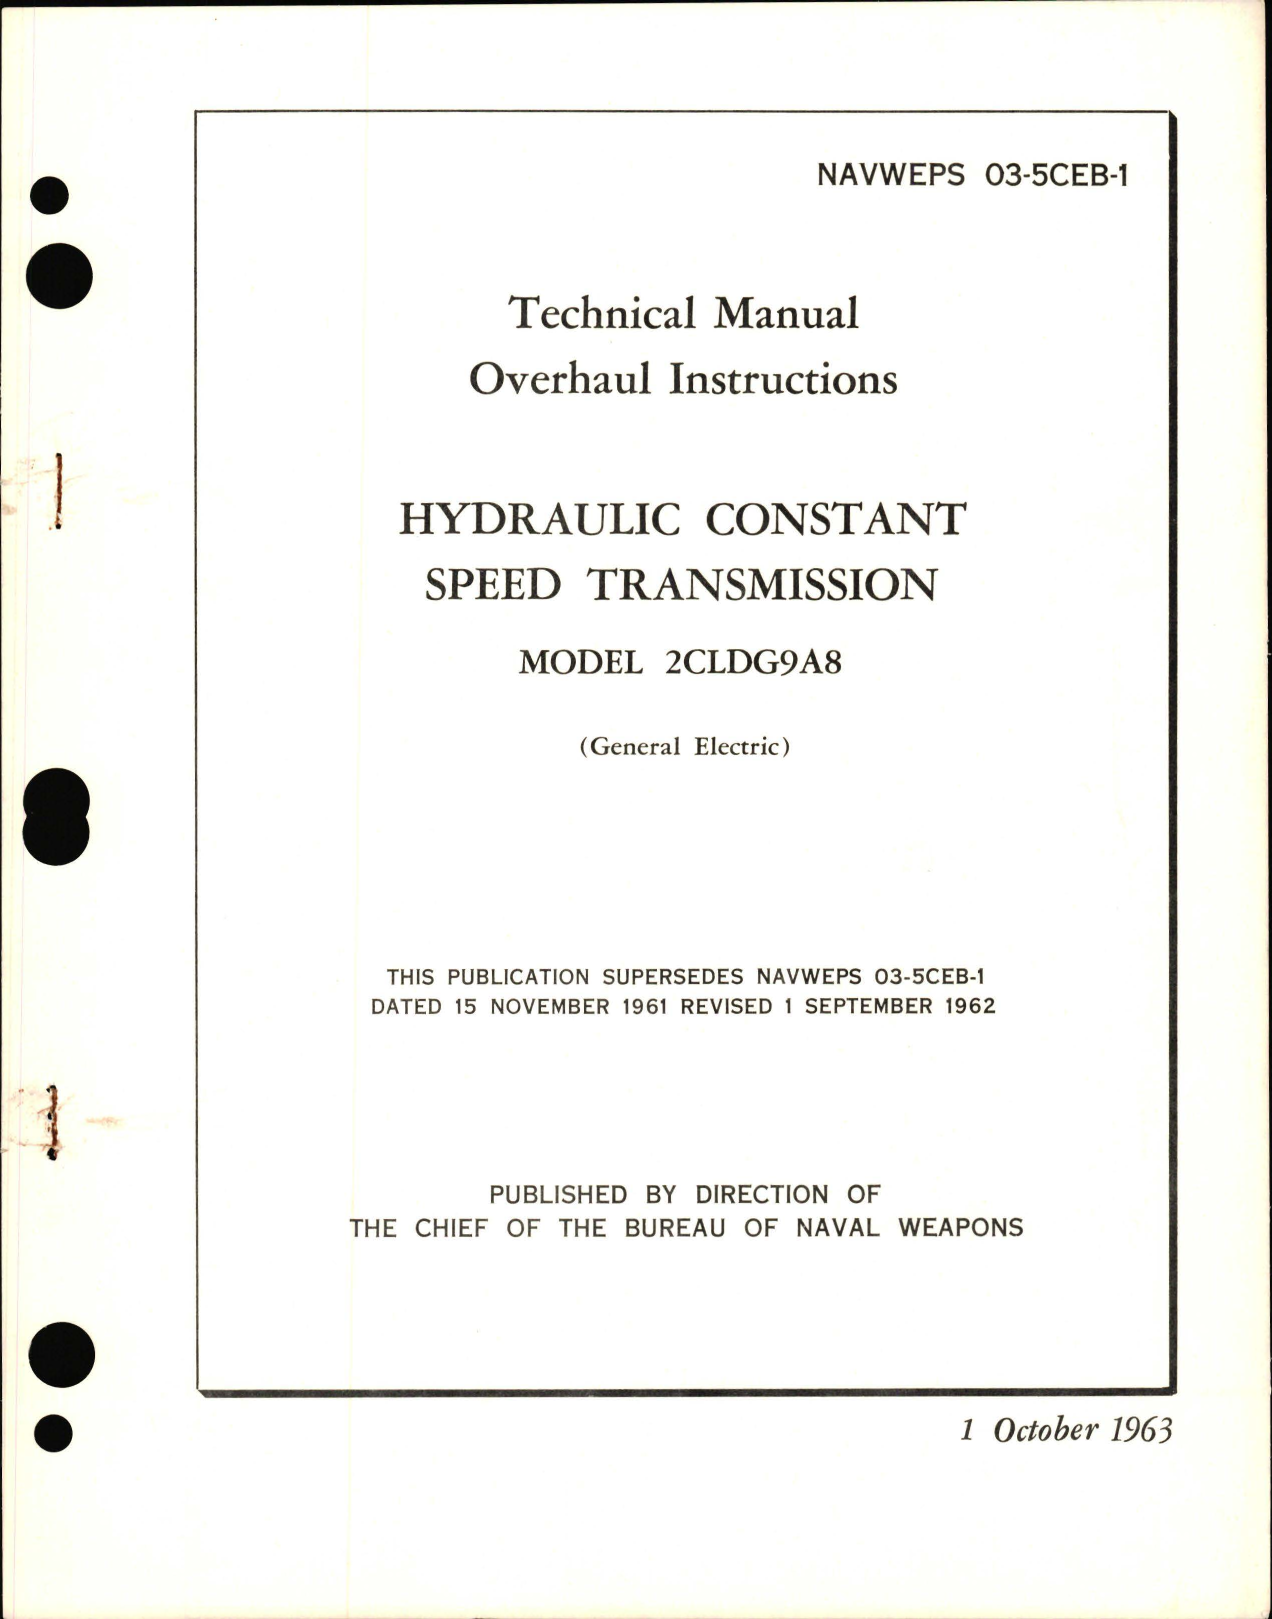 Sample page 1 from AirCorps Library document: Overhaul Instructions for Hydraulic Constant Speed Transmission - Model 2CLDG9A8